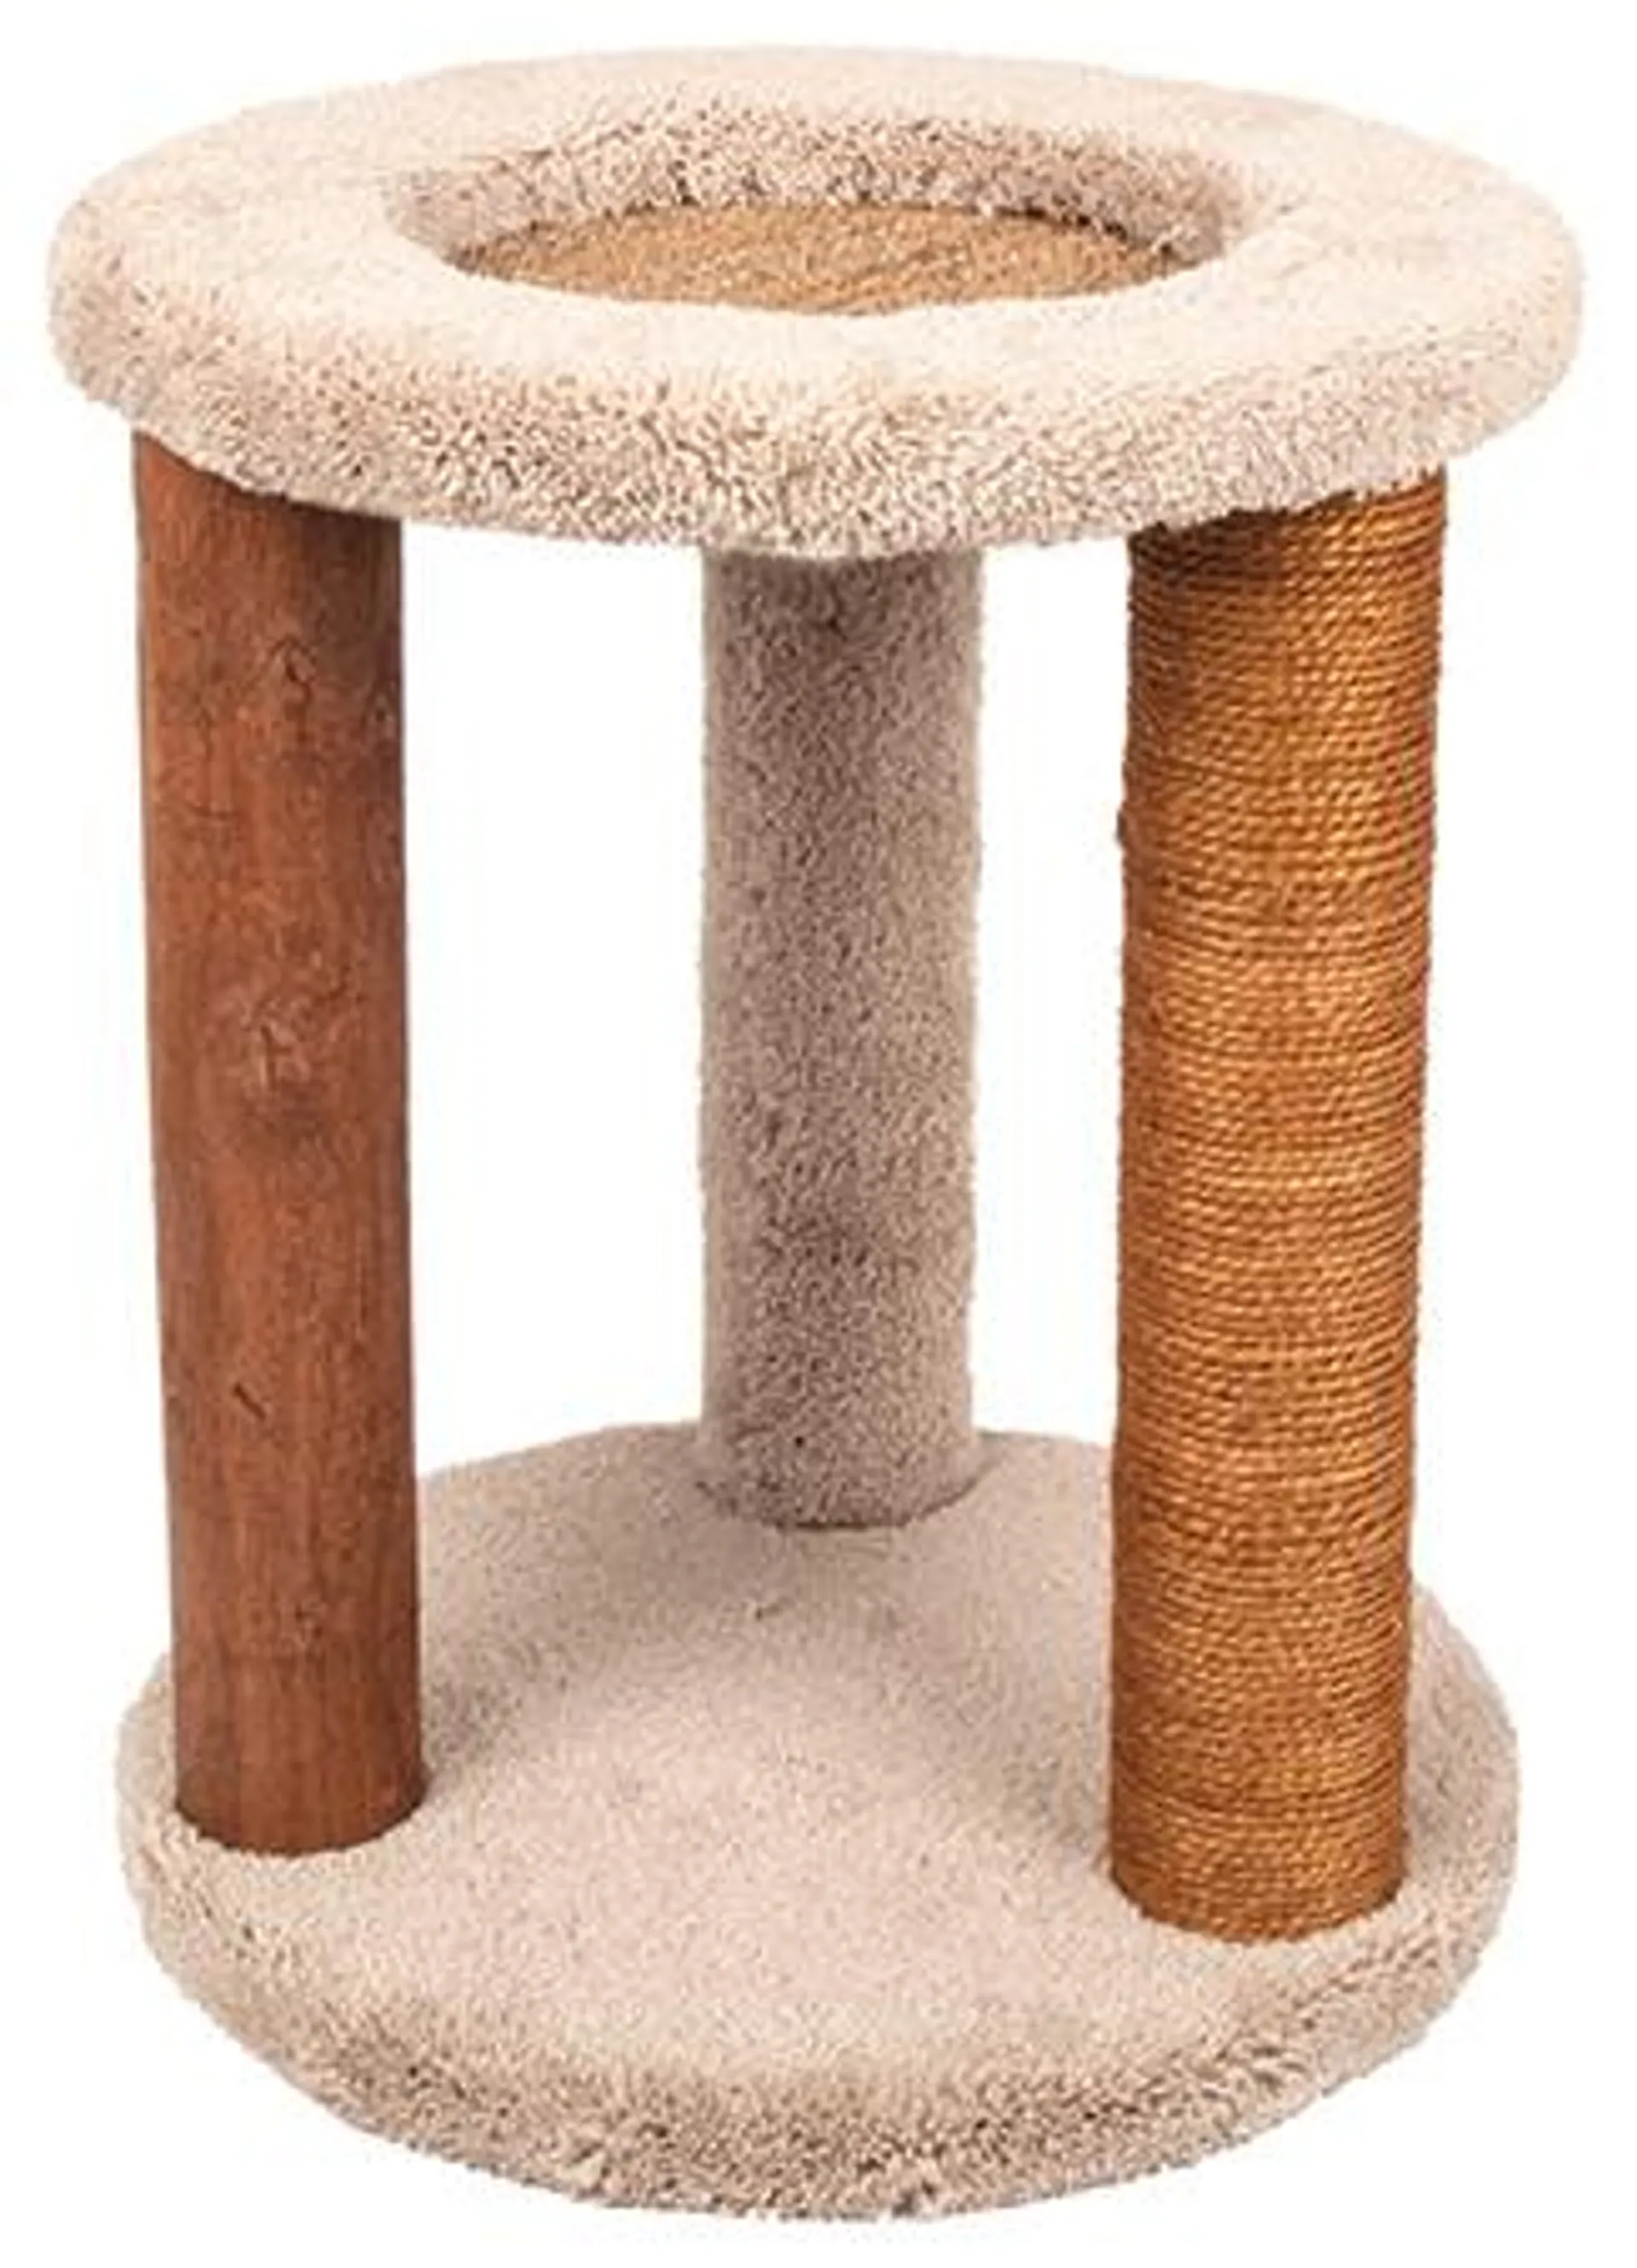 Play On Cat Furniture Scratch Playground and Lounge